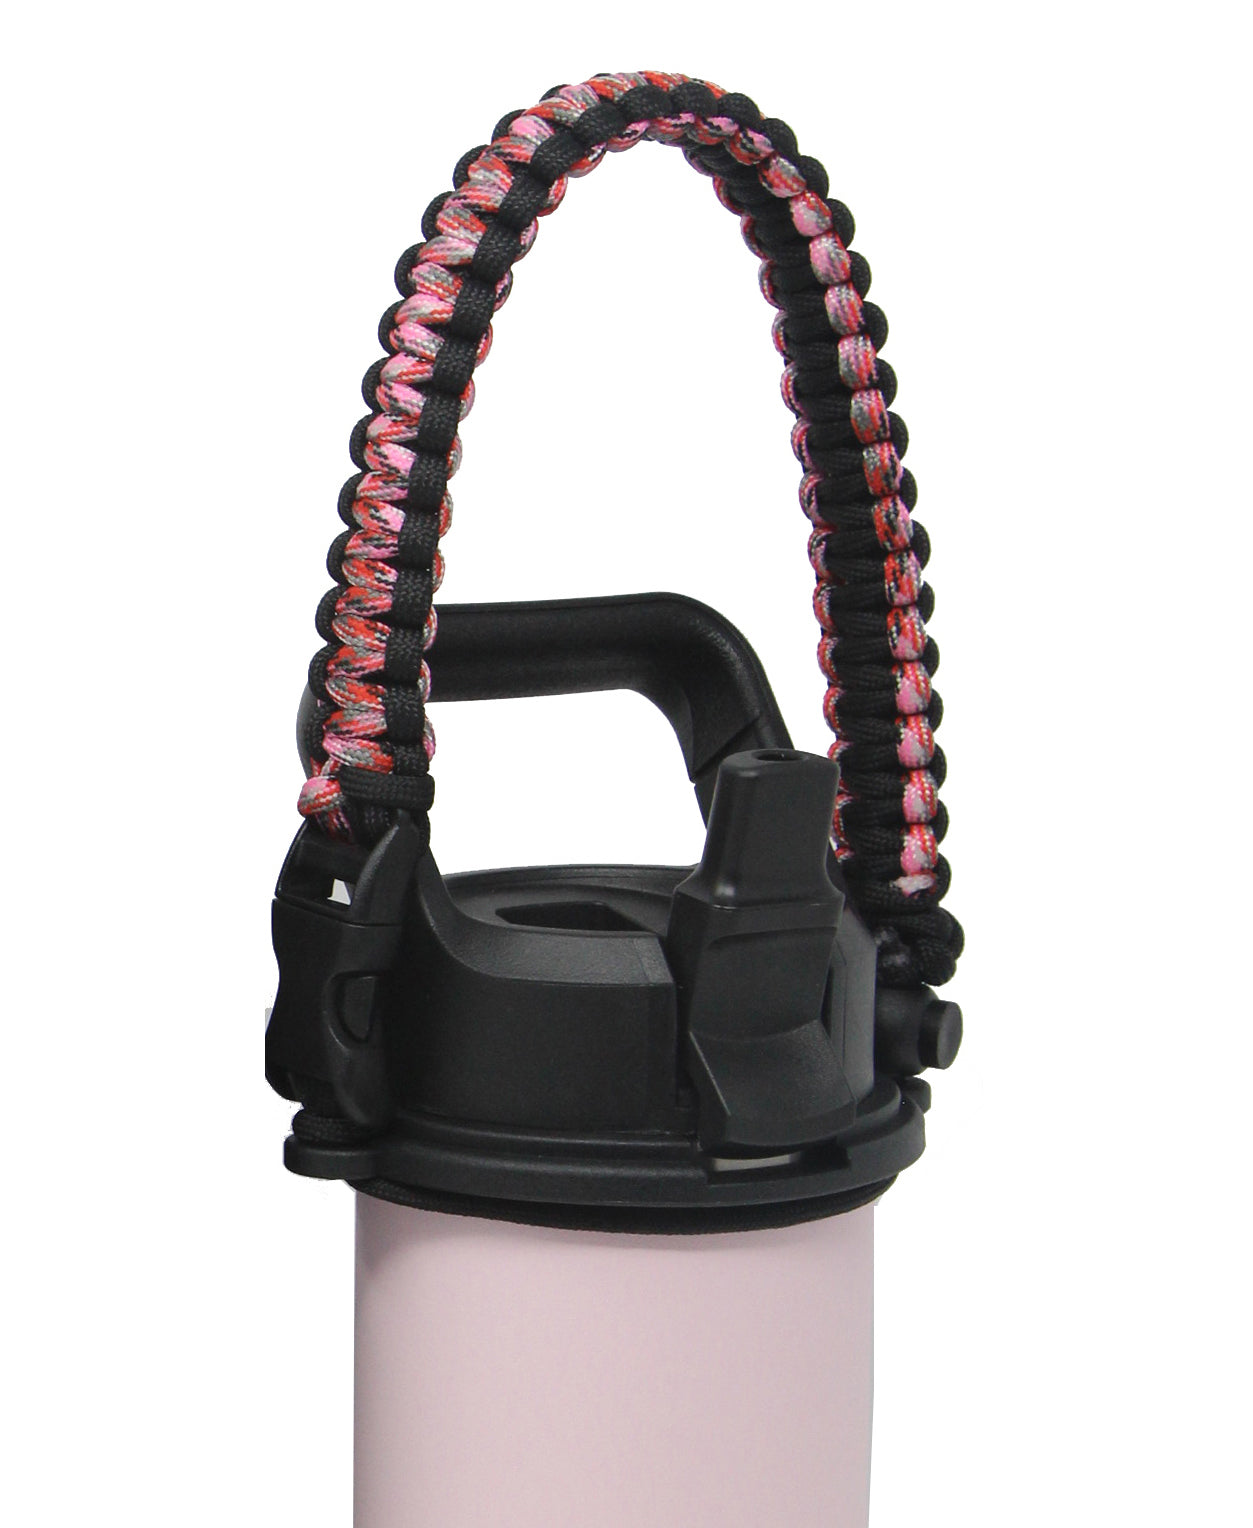 One MissionX Paracord Handle Compatible with Yeti Rambler 36oz 26oz 18oz 12oz 46oz Water Bottles, Durable Carrier Strap - HolderColorful